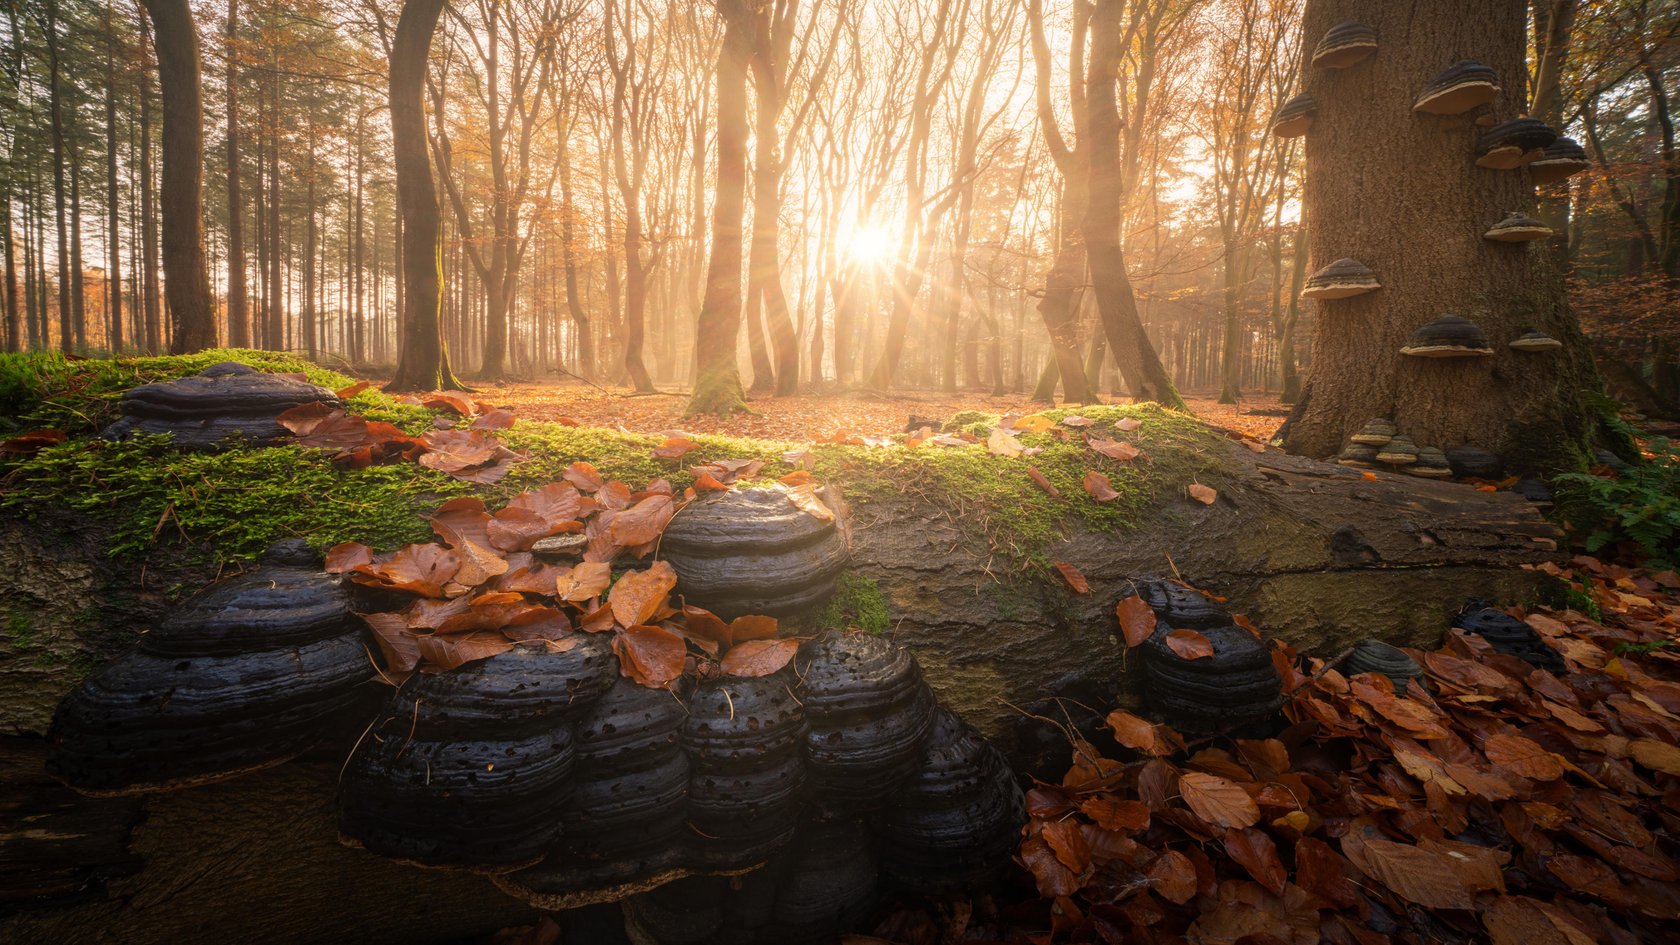 Magical Forests by Albert Dros. How to shoot and edit forest images(2)